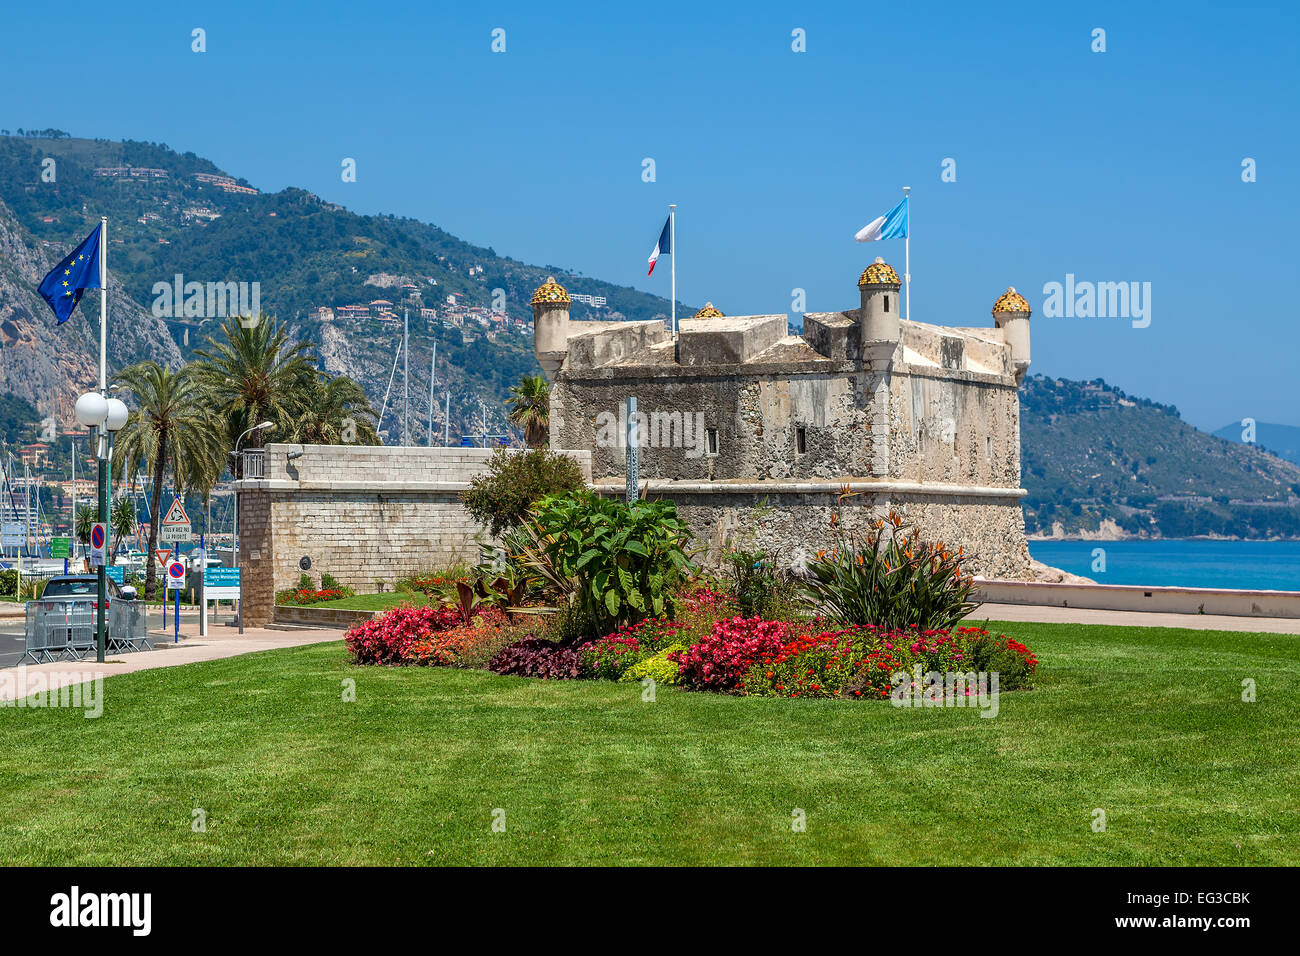 Green grass with flowers on promenade and medieval fortress in Menton, France. Stock Photo